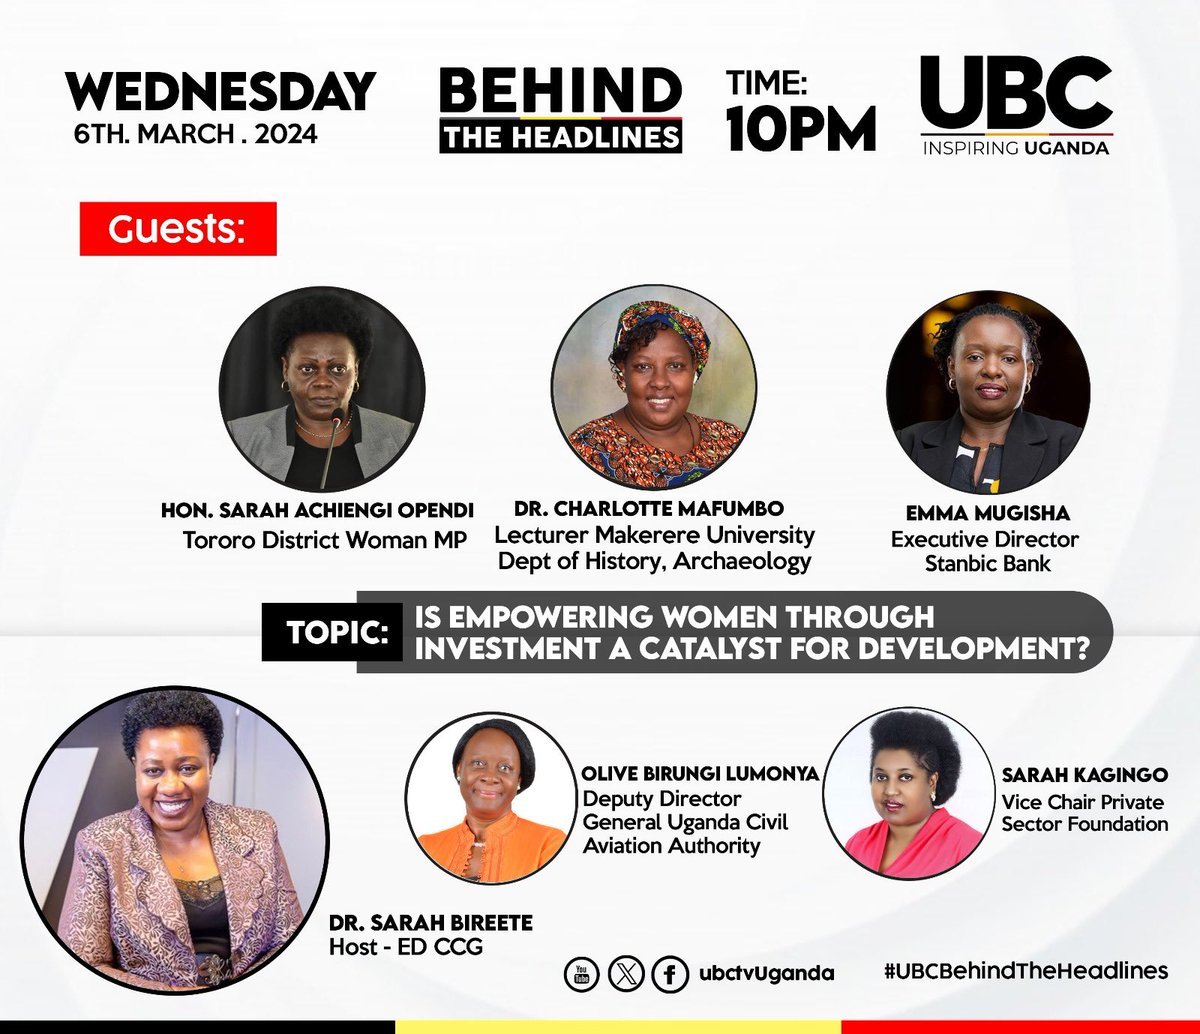 We celebrate Women’s Month this way @ubctvuganda, the host @SarahBireete Let’s me her panel @SsaliSarah @SarahKagingo @LumonyaOlive What milestones have been achieved for the girl-child? Would the support to the boy-child complement the efforts more? #UBCBehindtheHeadlines